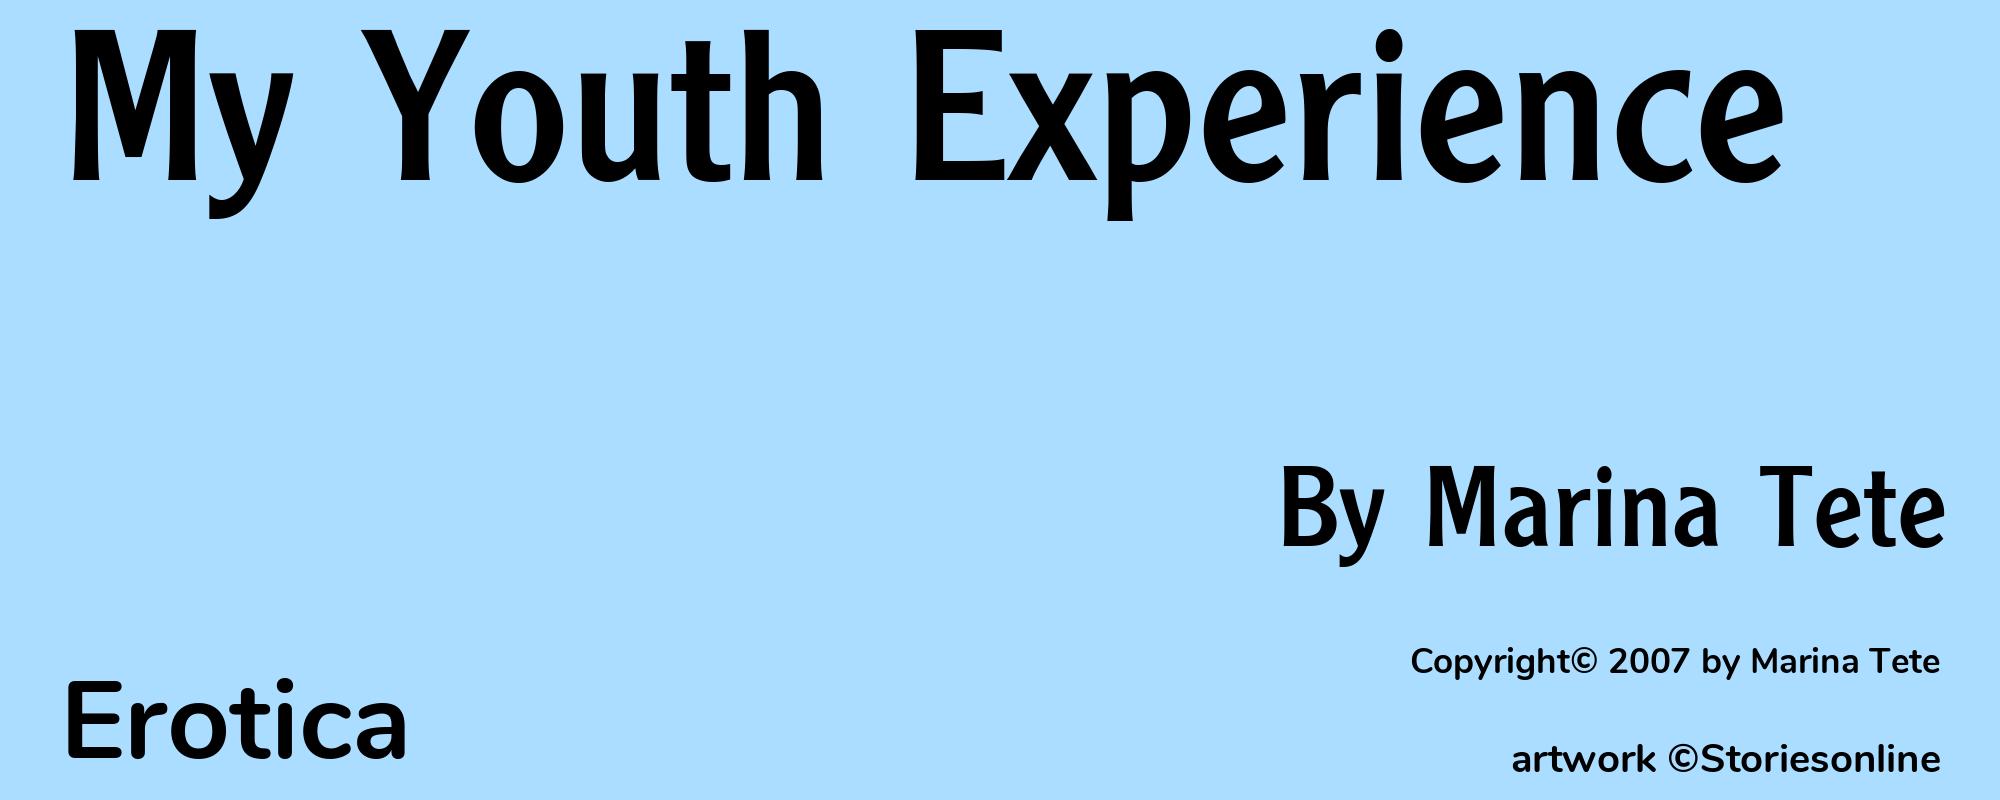 My Youth Experience - Cover